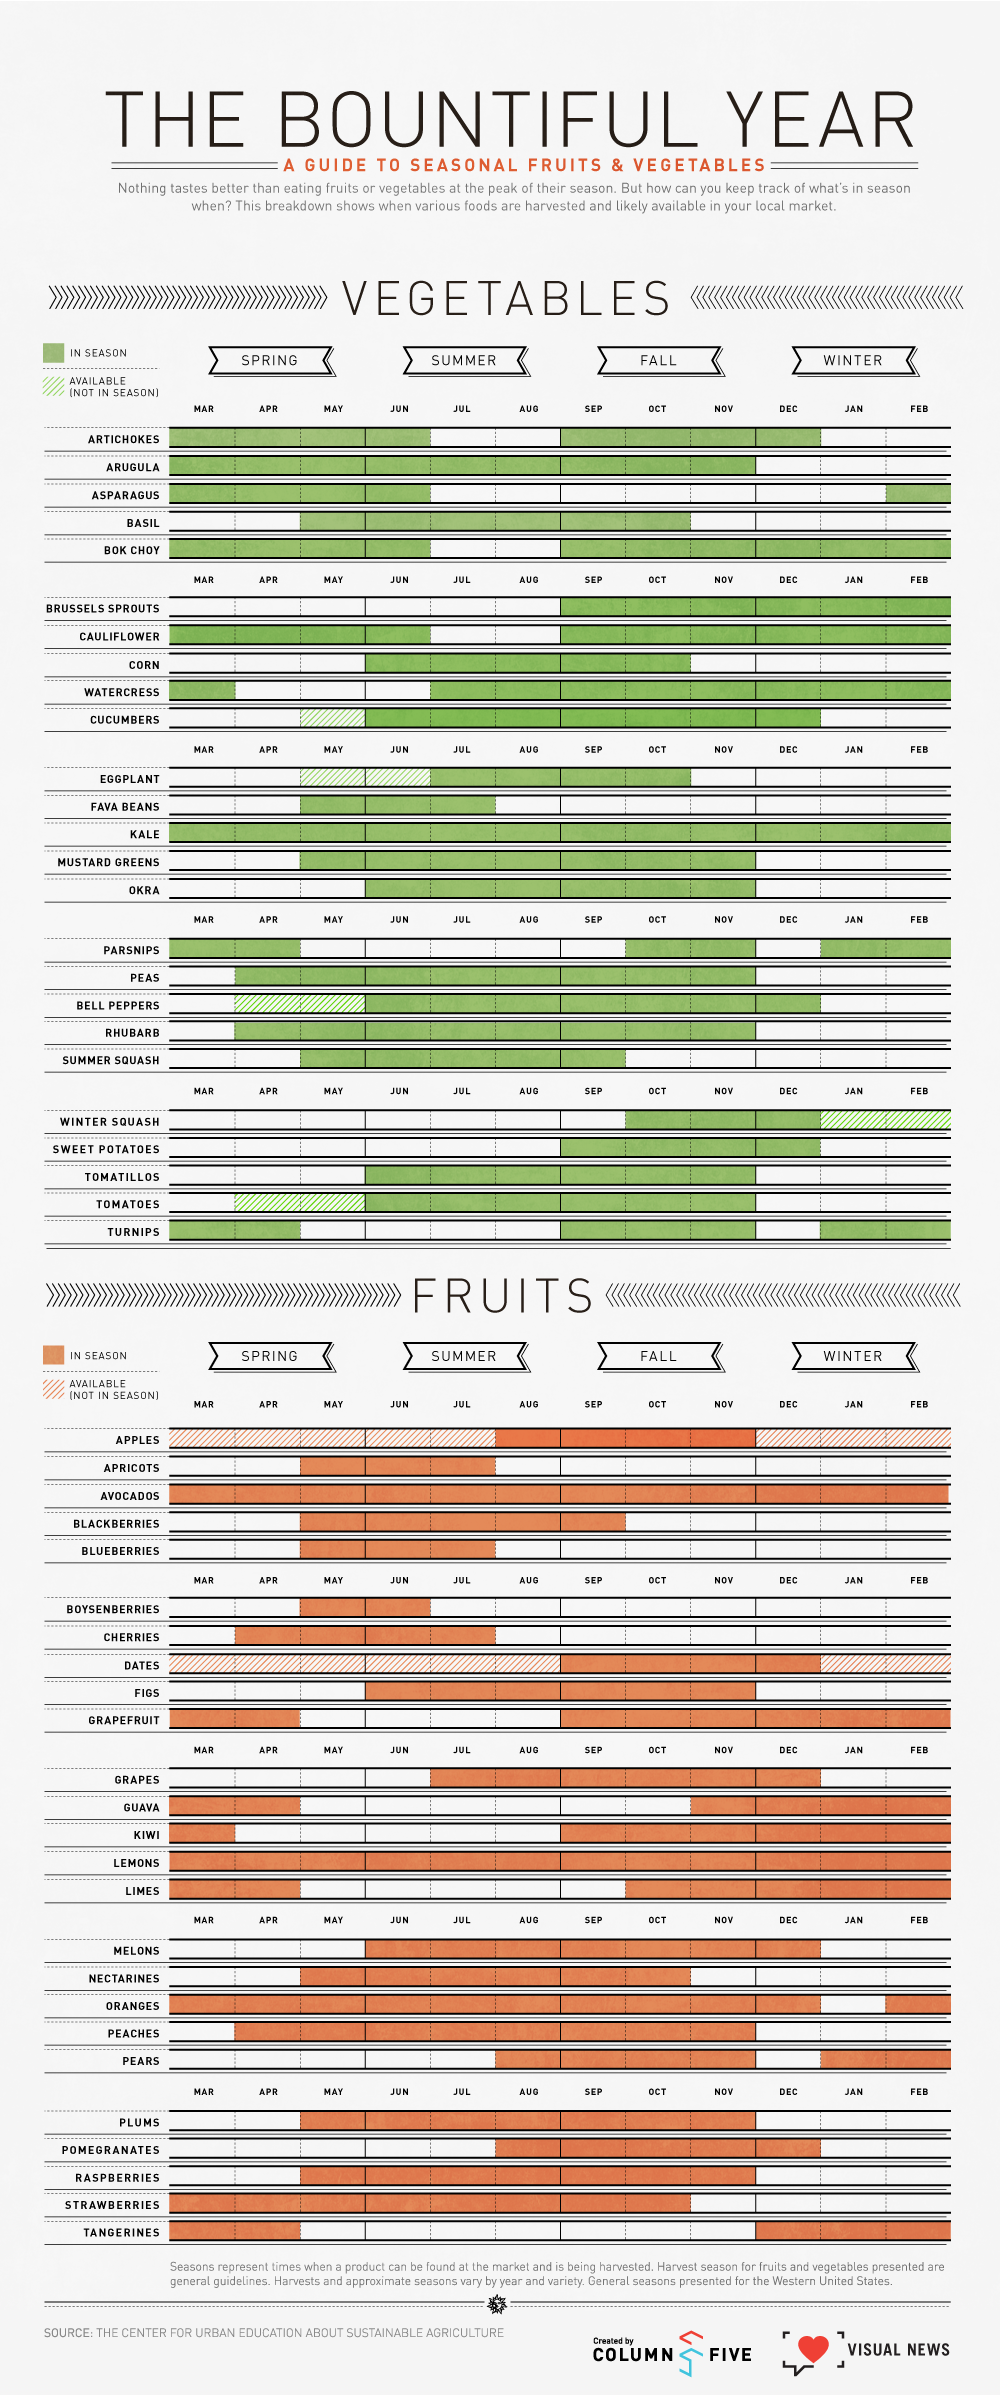 The Bountiful Year: A Guide To Seasonal Fruits & Vegetables